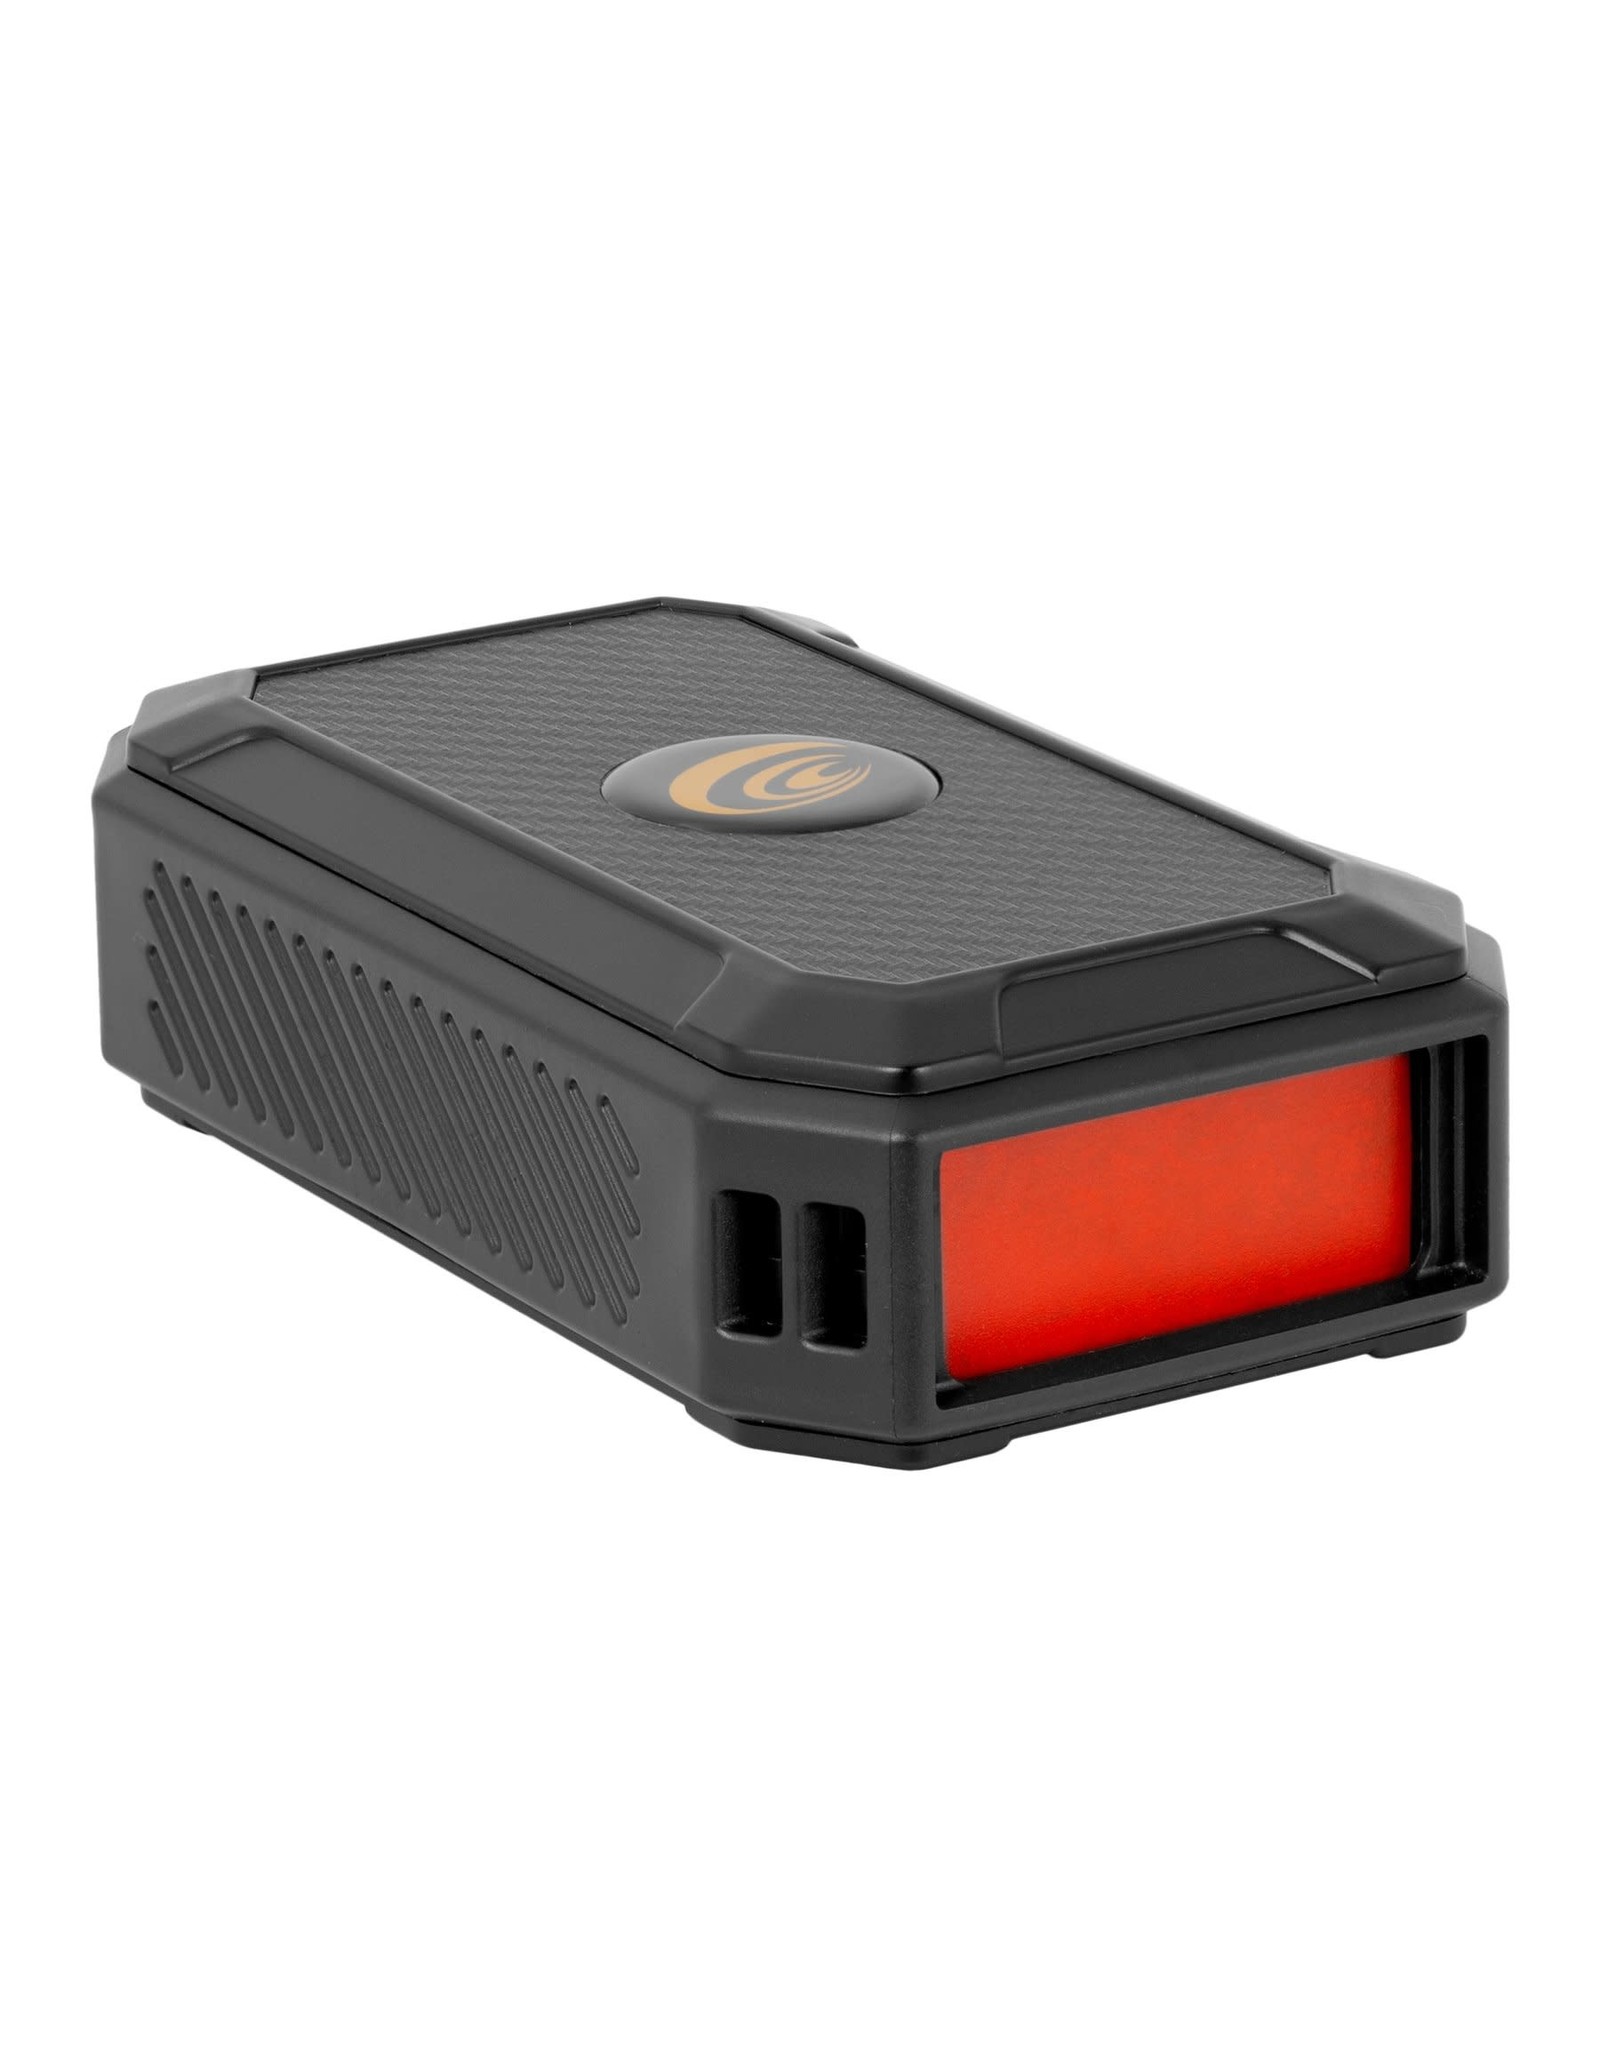 Explore Scientific Explore Scientific Explore Scientific USB Power Bank with Red LED Flashlight